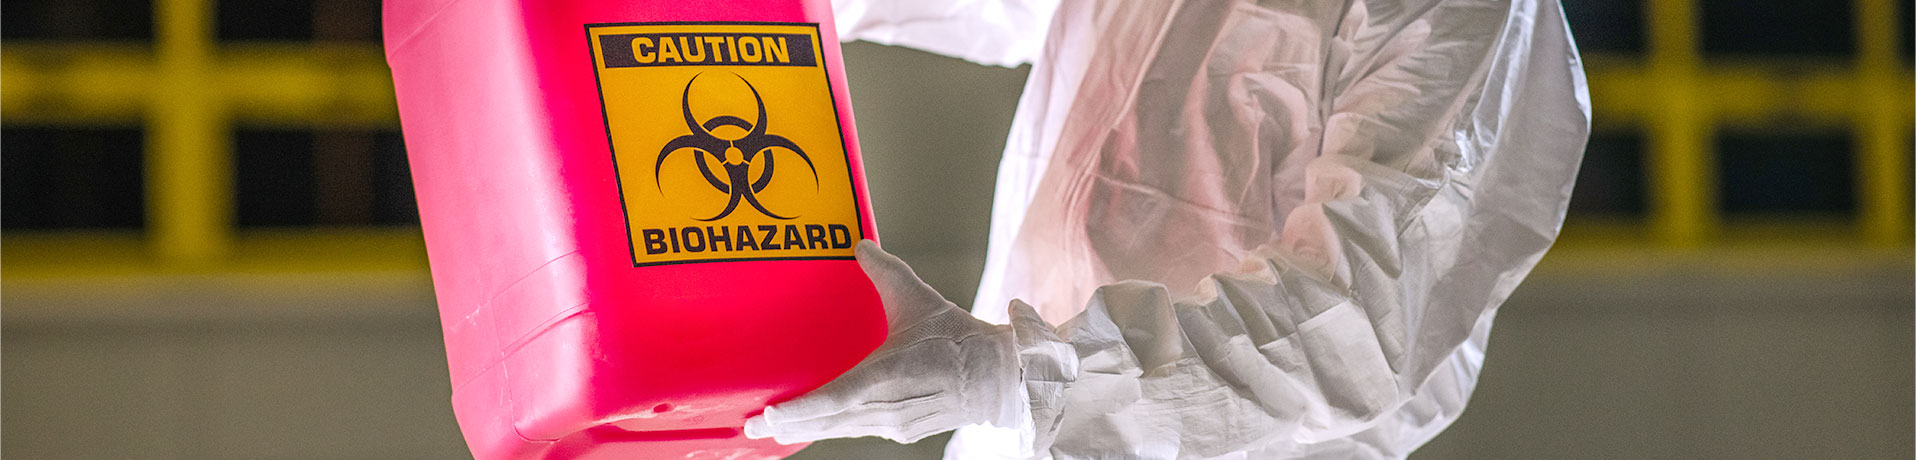 Cleaning person in full personal protective equipment holding a container especially meant for biohazard waste